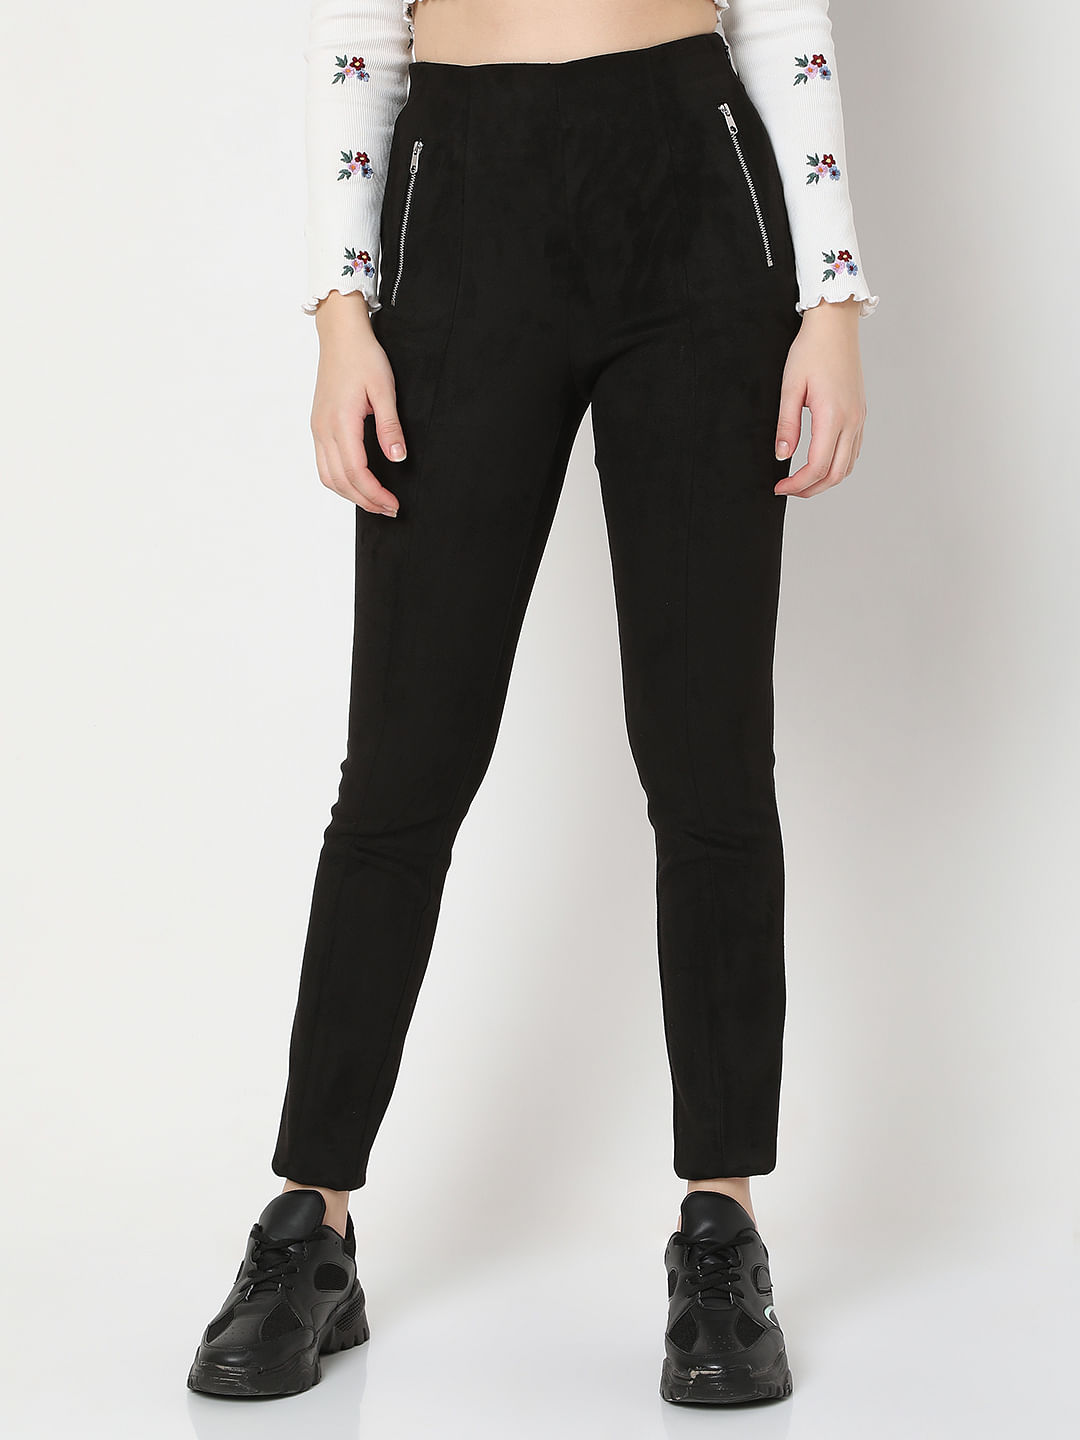 Buy AND GIRL Black Solid Rayon Skinny Fit Girls Trousers | Shoppers Stop